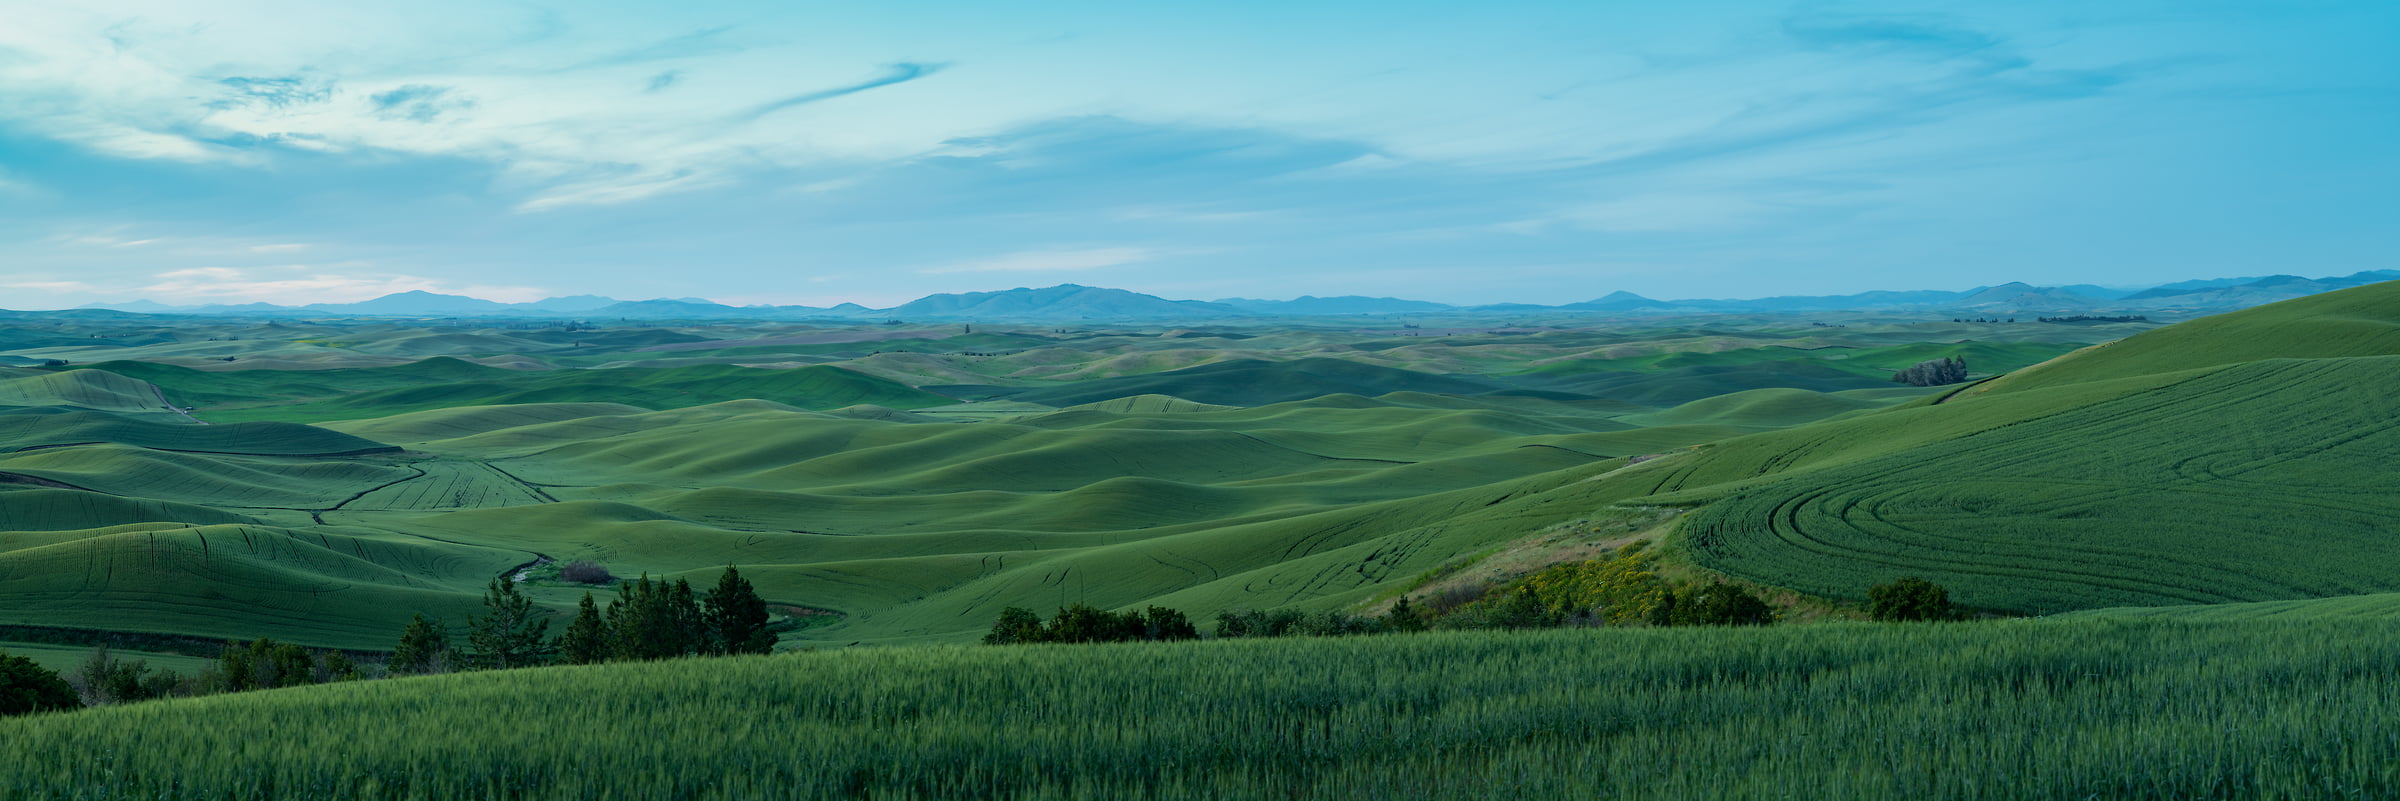 362 megapixels! A very high resolution, large-format VAST photo print of rolling hills at dusk; panorama landscape photograph created by Greg Probst in Steptoe Butte State Park, Washington.